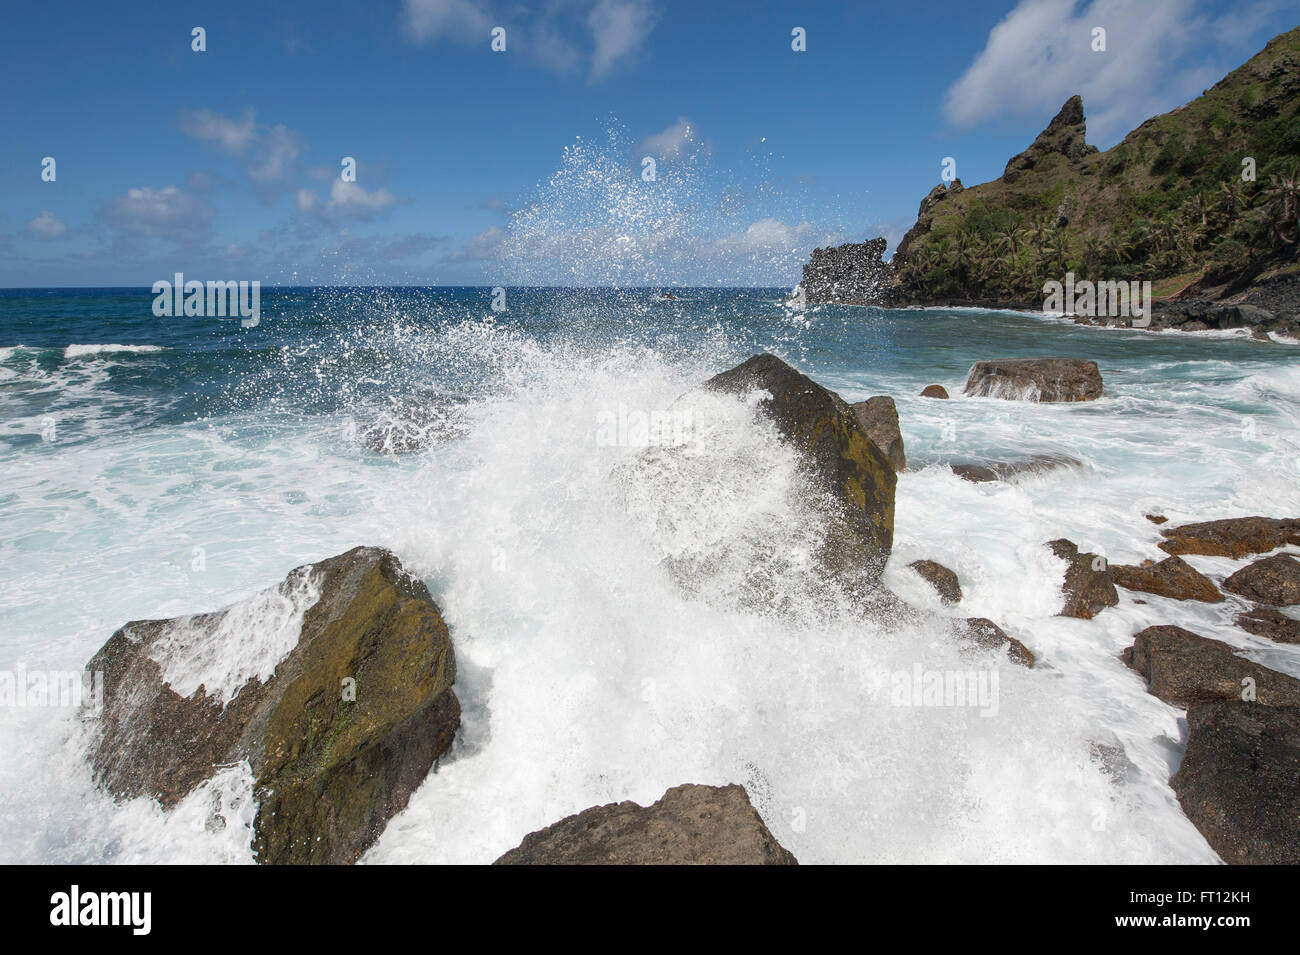 Pacific Ocean waves crashing onto rocks, Pitcairn, Pitcairn Group of Islands, British Overseas Territory, South Pacific Stock Photo